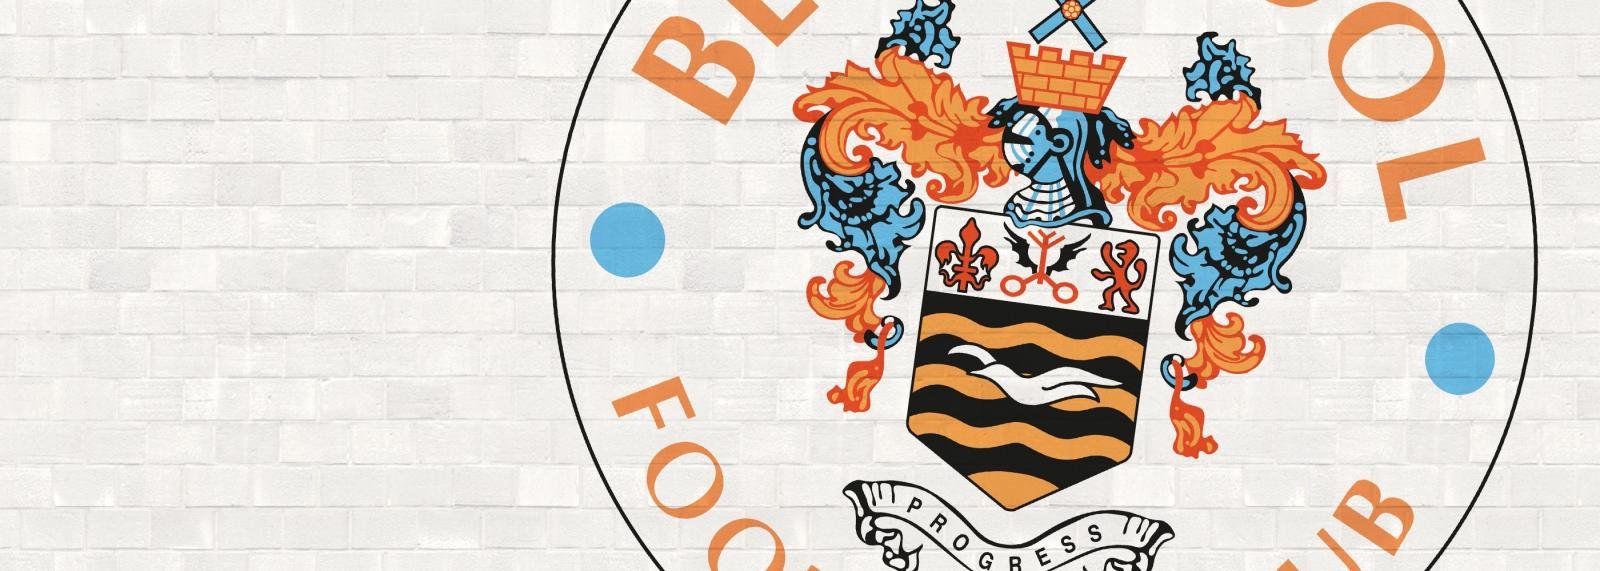 Results are all that matter following Blackpool’s recent ‘six-pointer’ successes